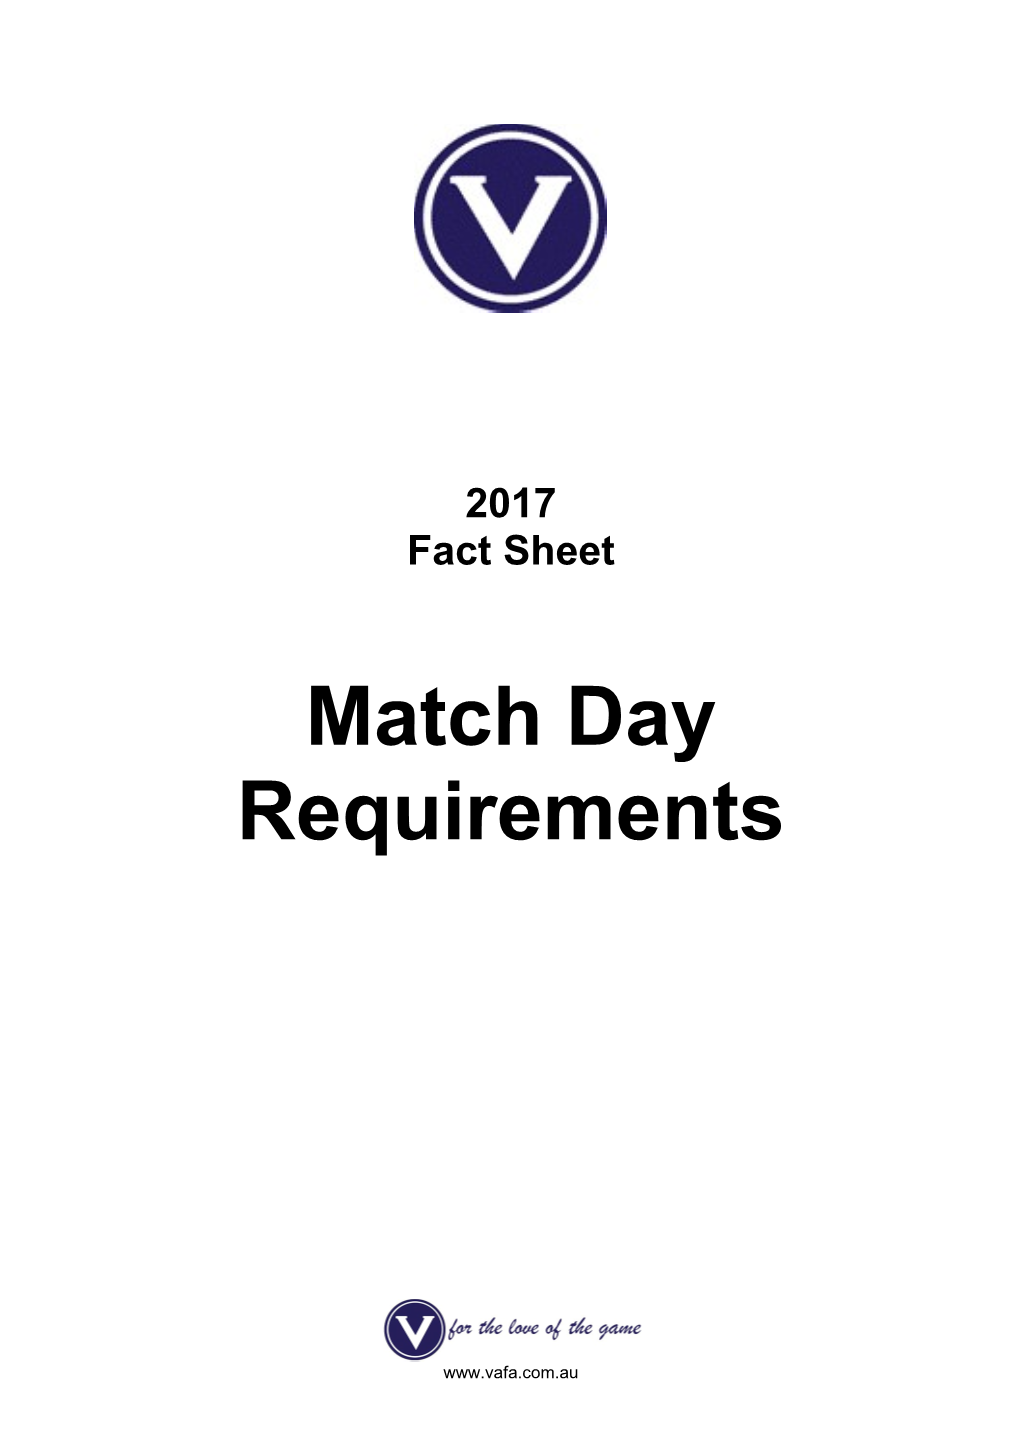 Match Day Requirements